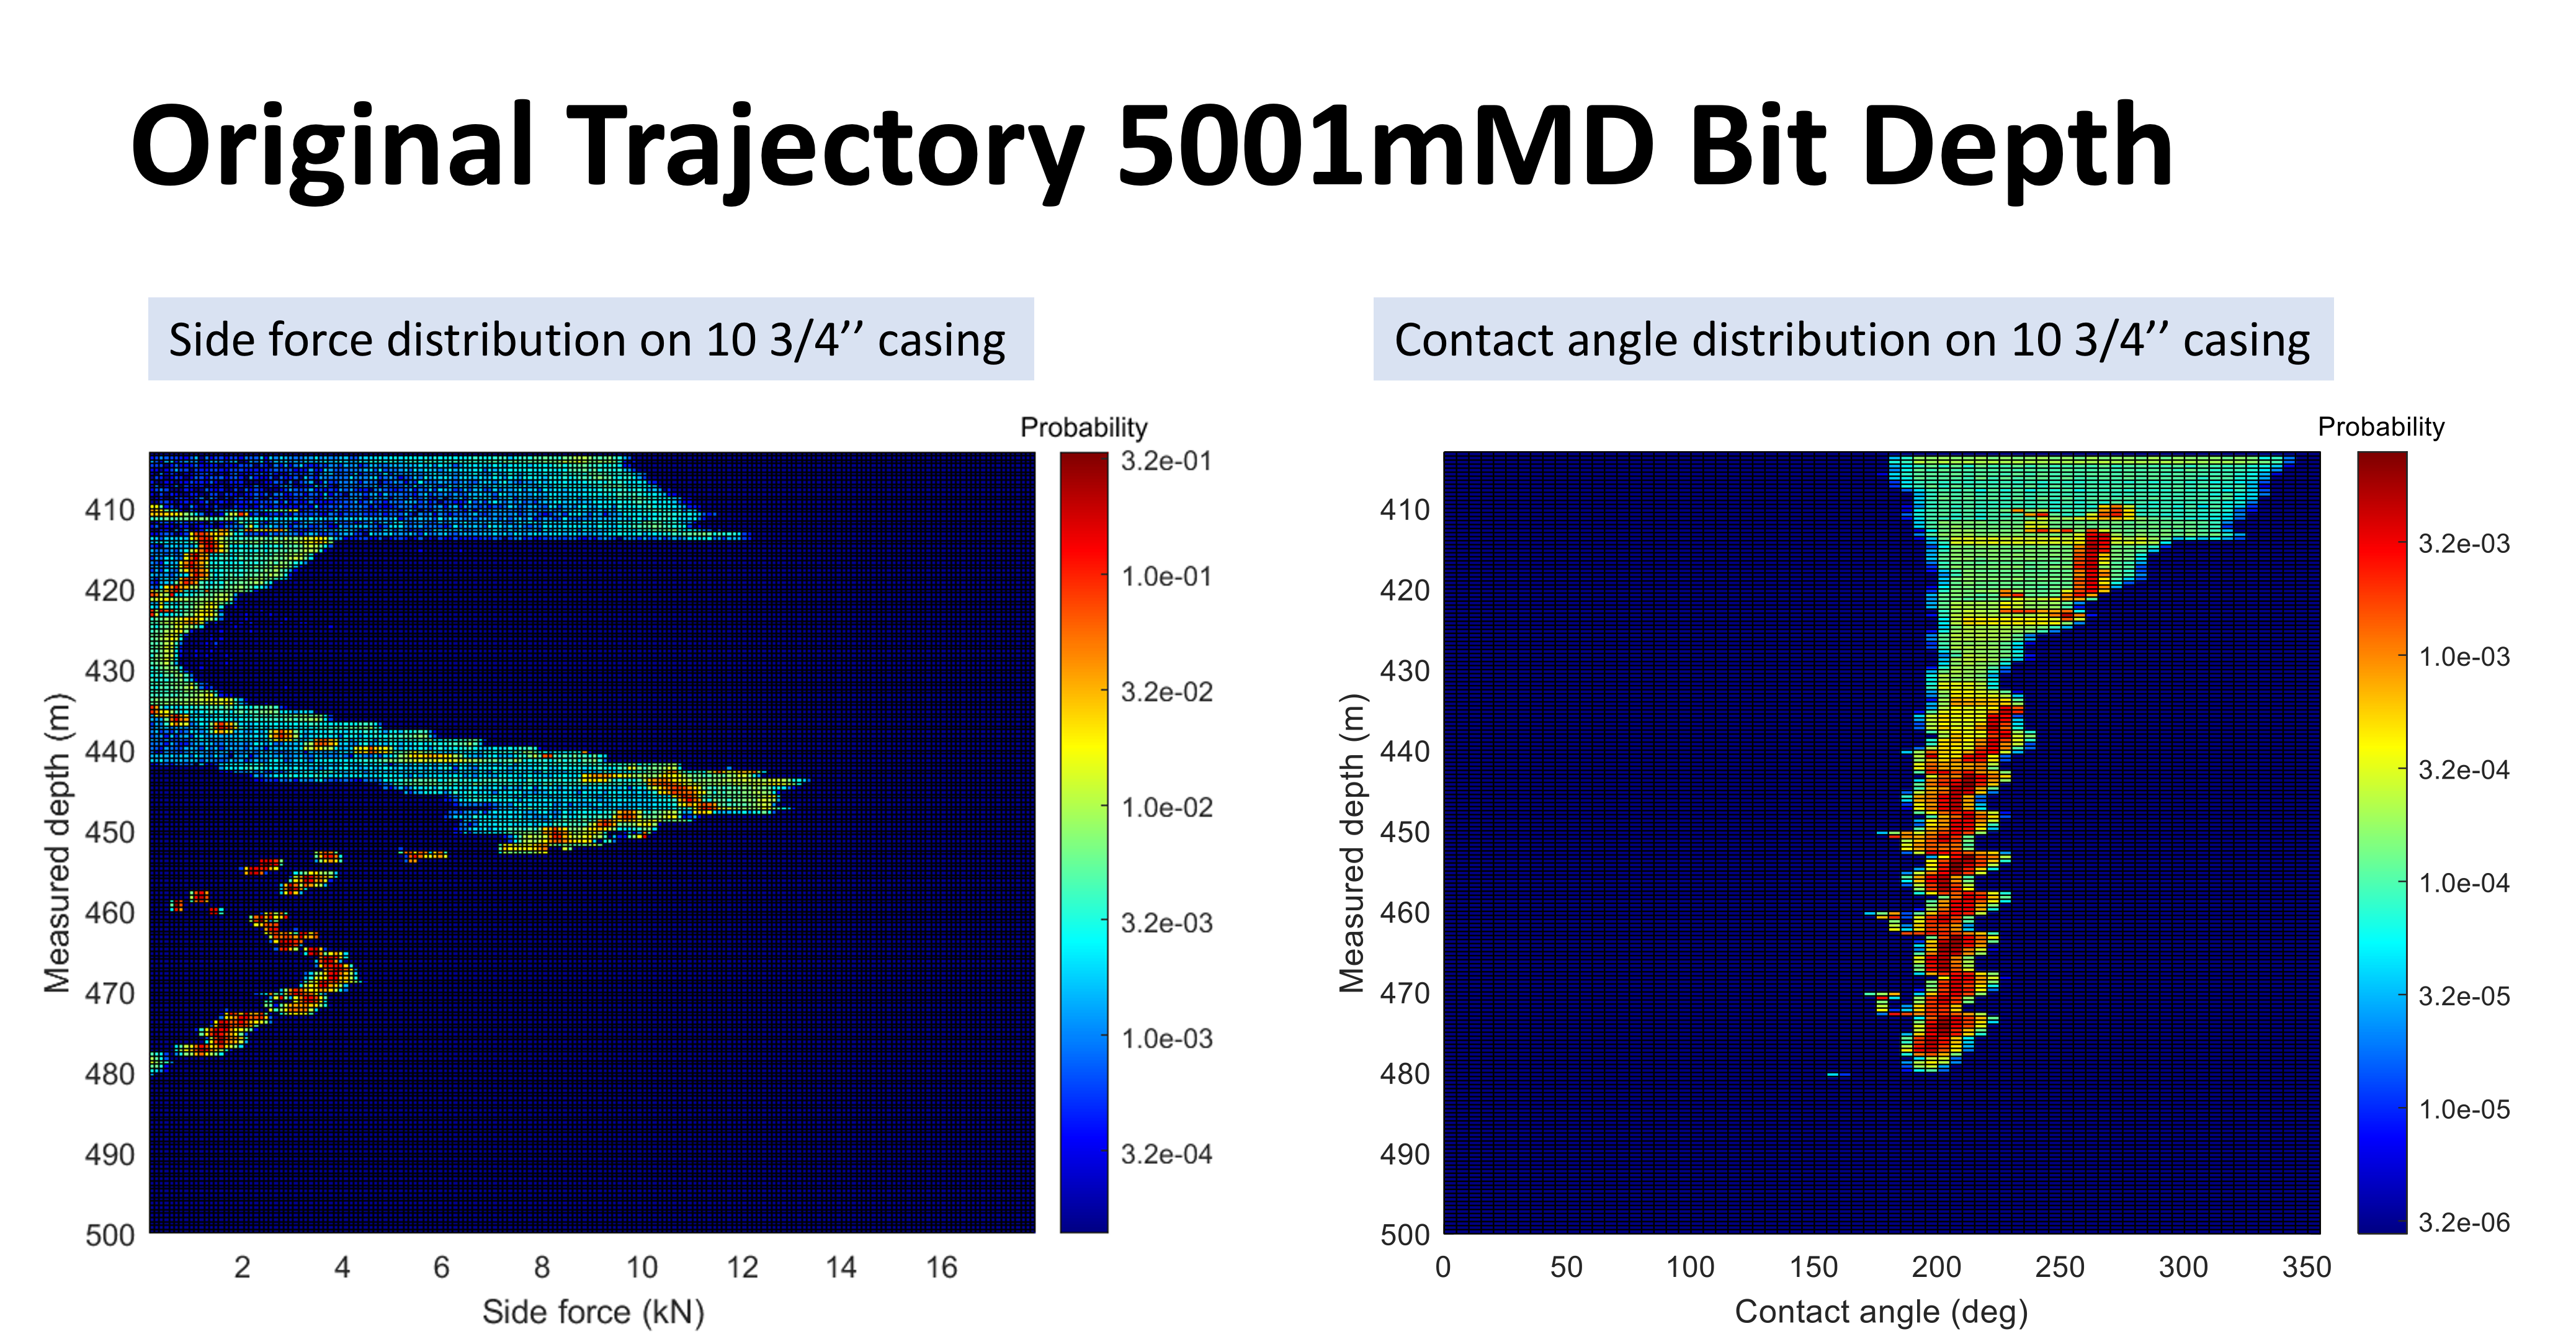 Side forces and contact angle distribution on 10 ¾” casing from 410 m MD to 500 m MD